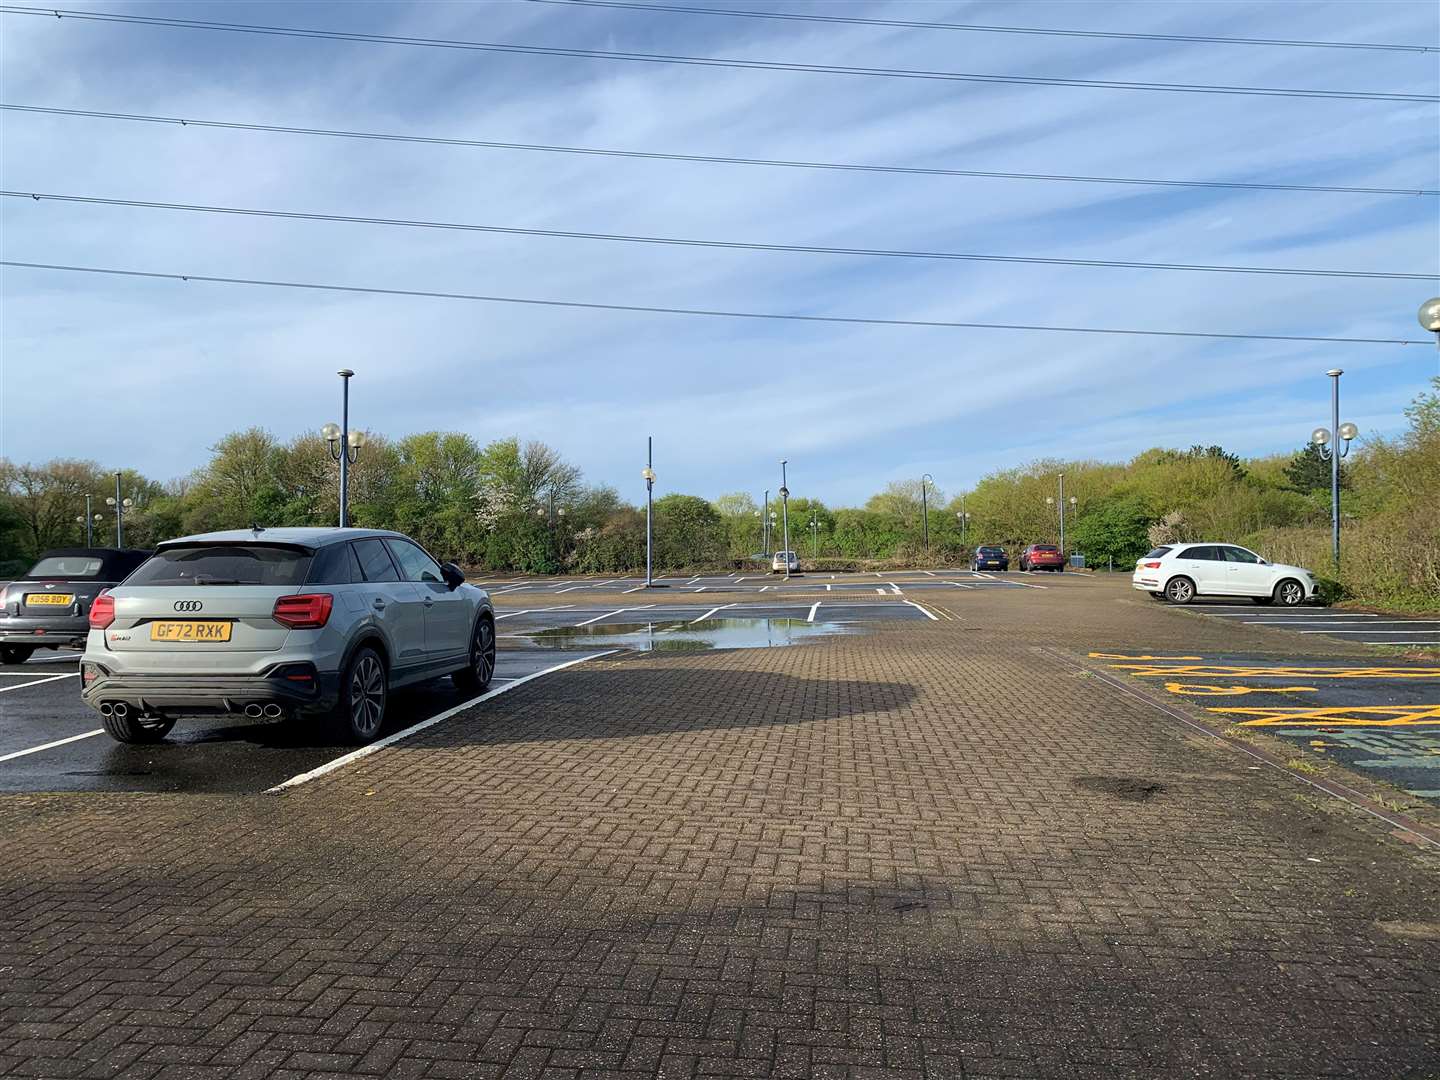 19 cars arrived at Sturry Road Park and Ride in the course of an hour